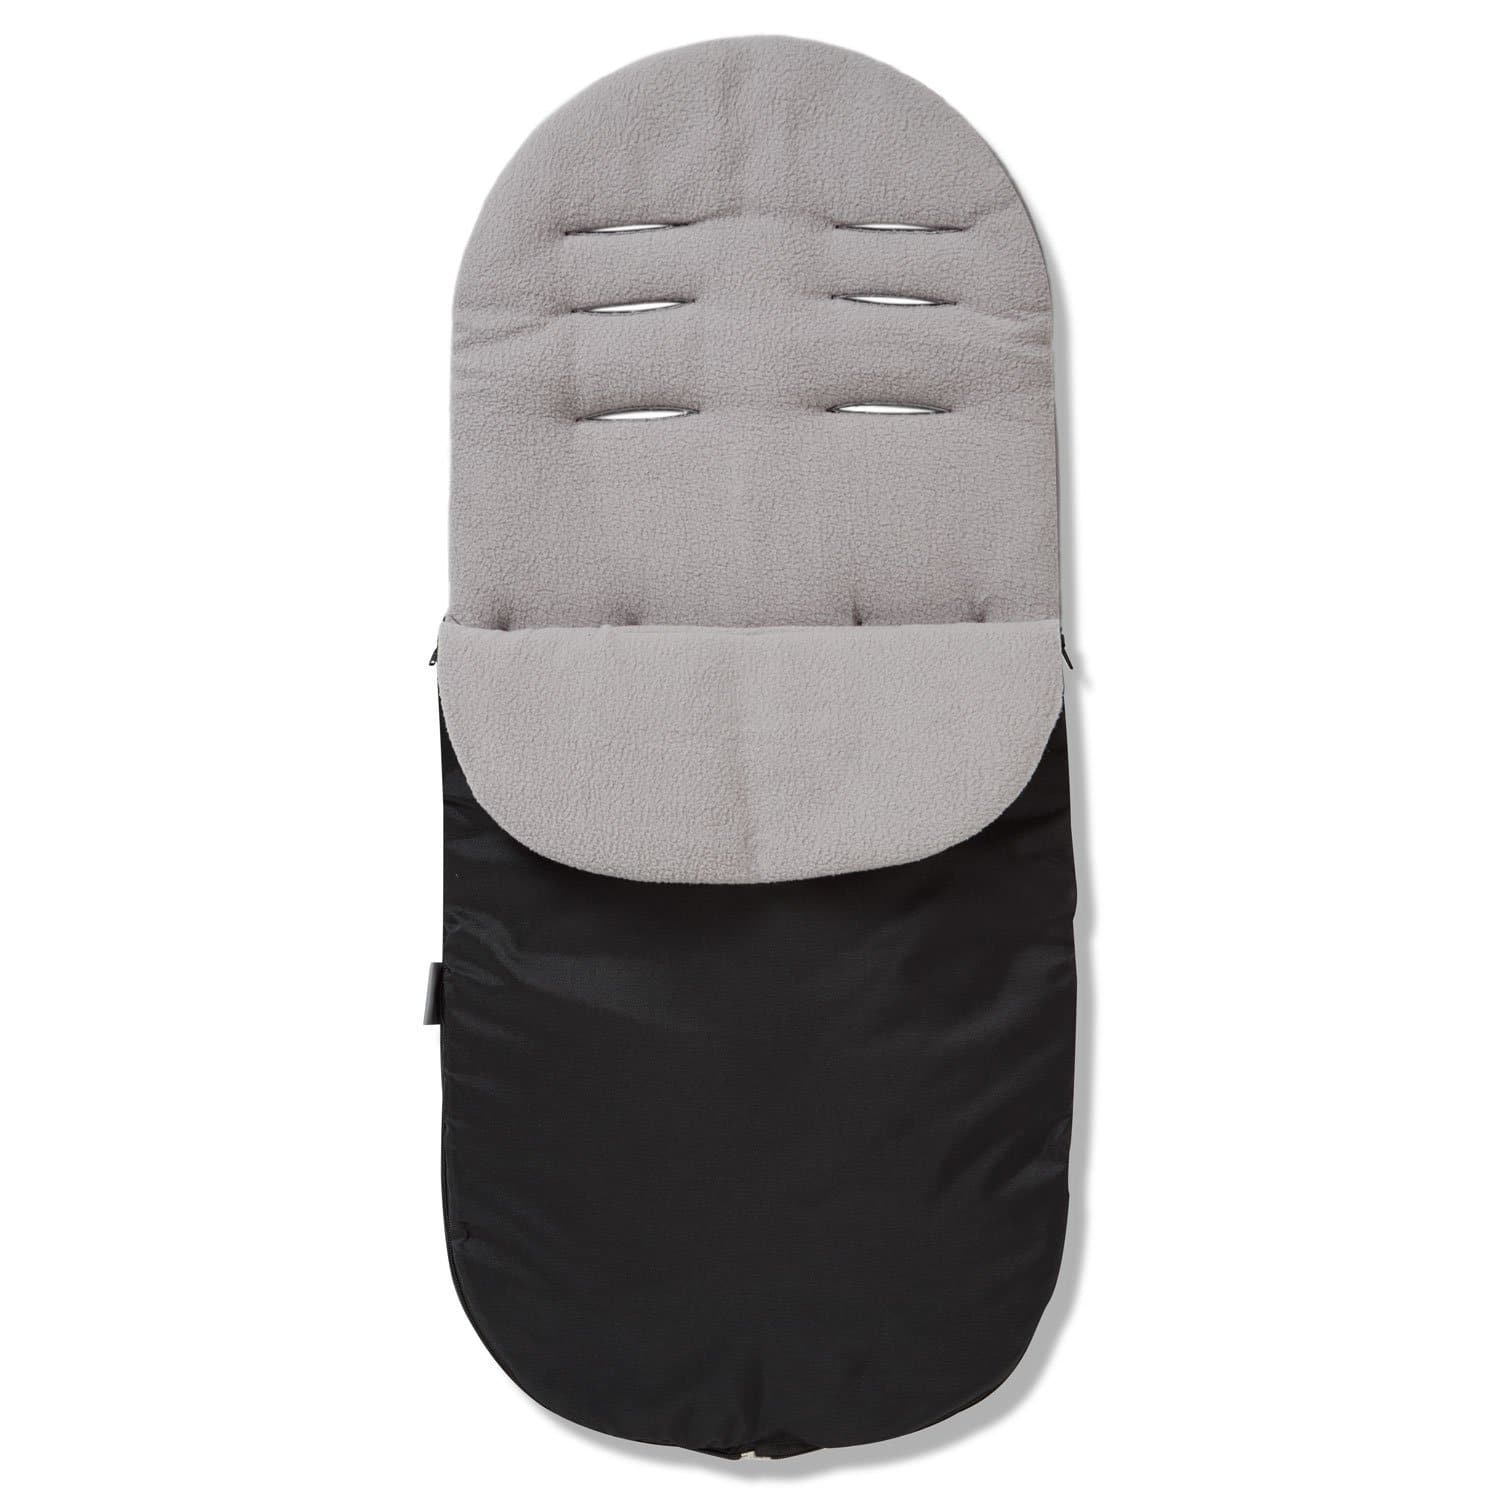 Footmuff / Cosy Toes Compatible with Pericles - Grey / Fits All Models | For Your Little One